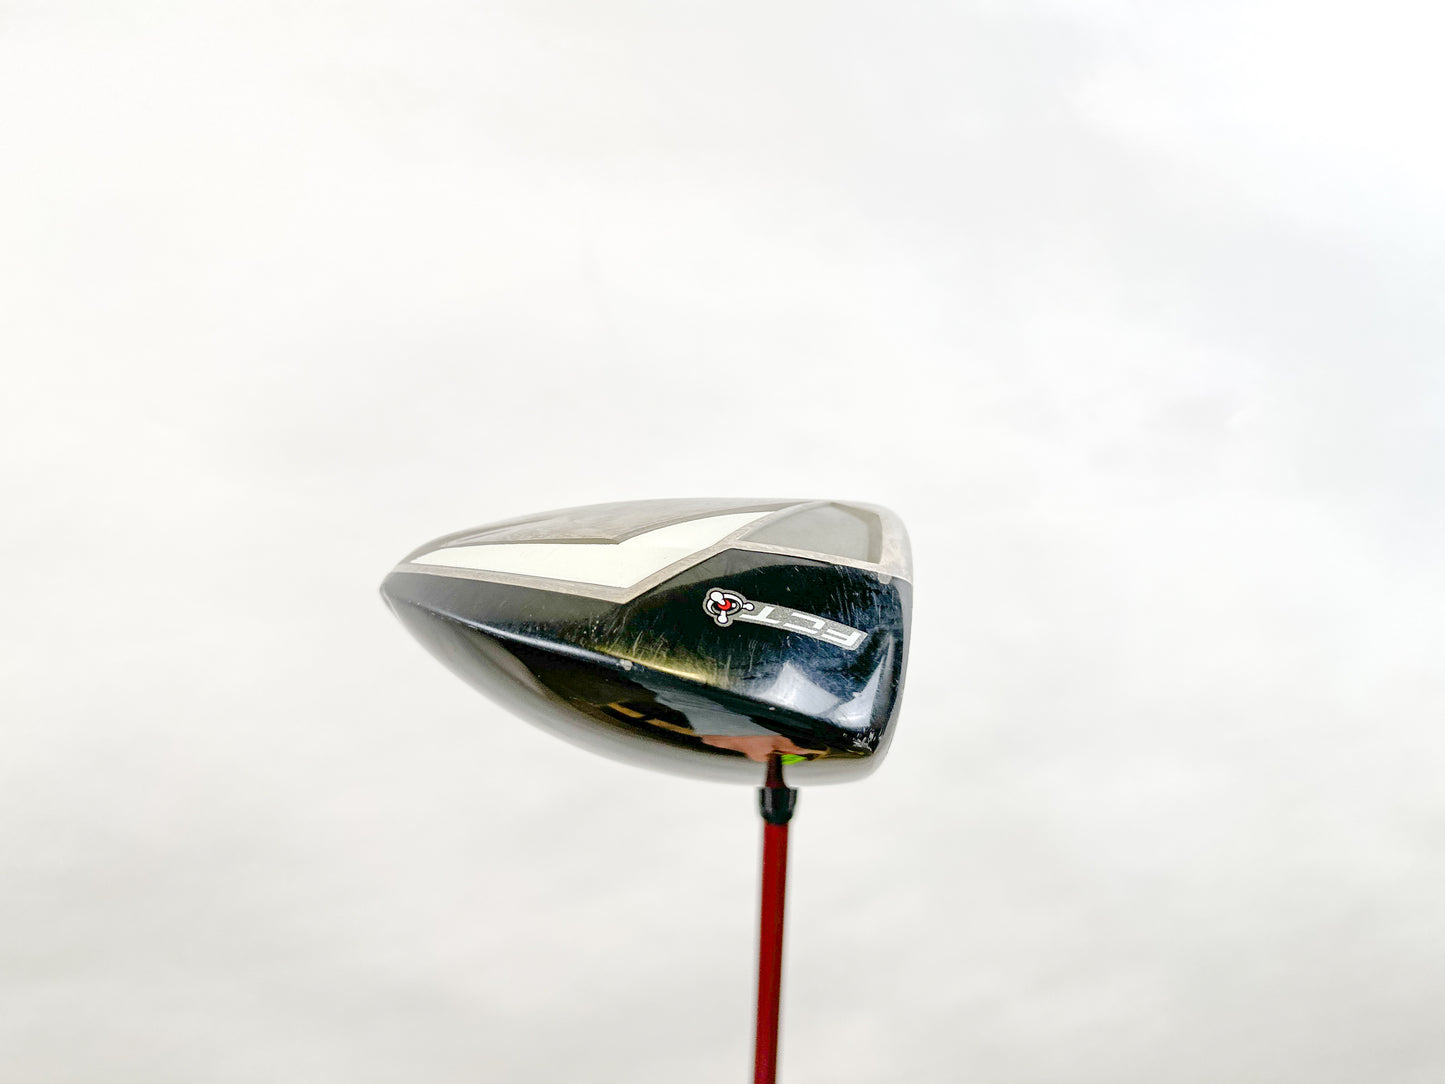 Used TaylorMade R9 460 Driver - Left-Handed - 9.5 Degrees - Stiff Flex-Next Round